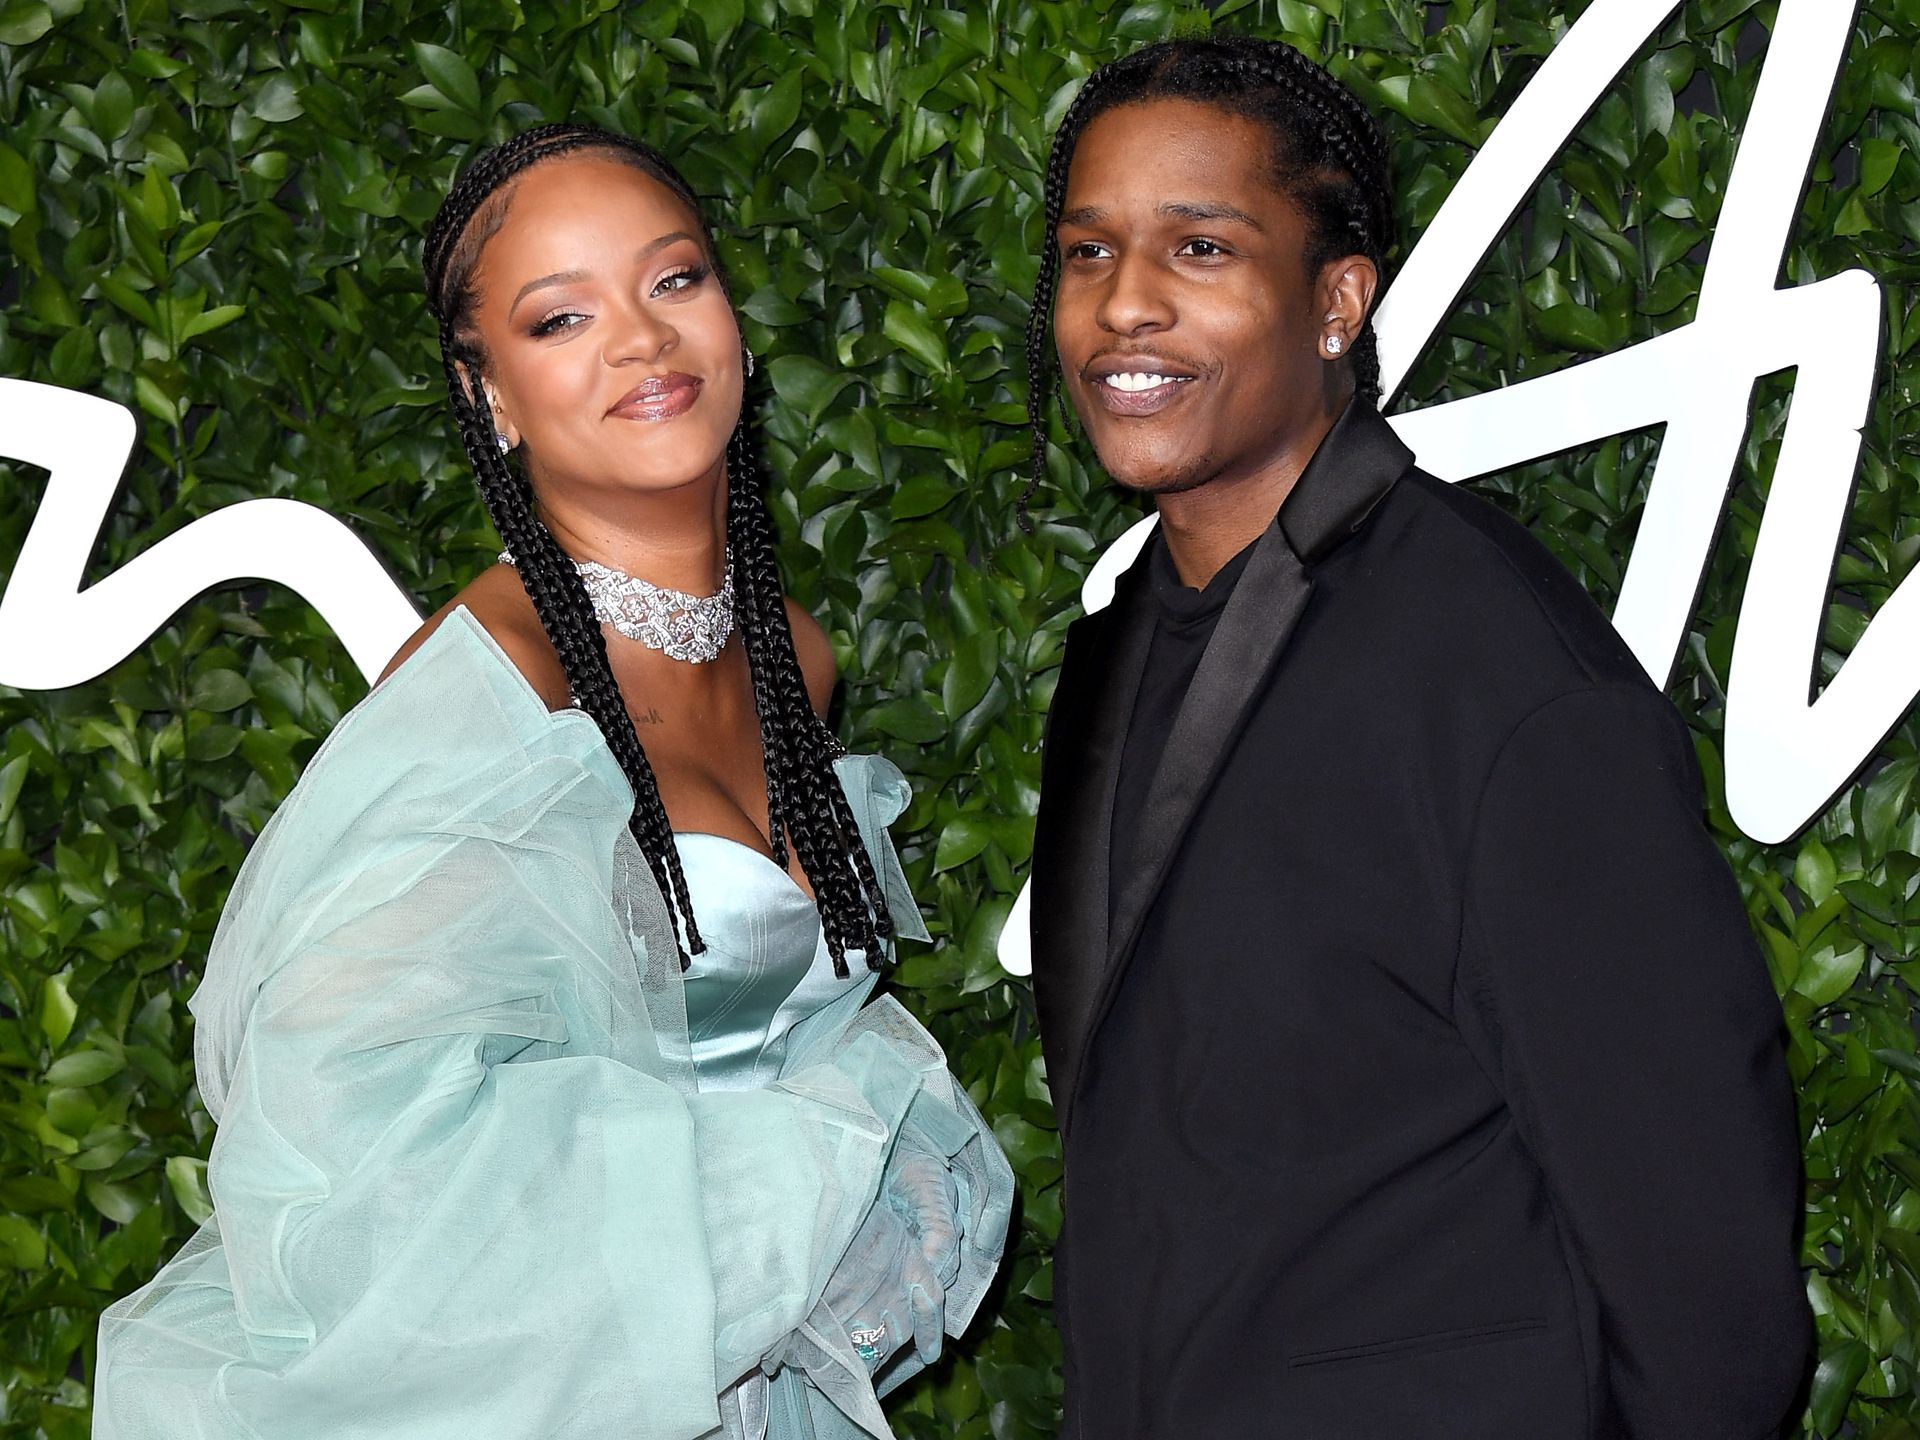 ASAP Rocky Net Worth: How much he and Rihanna are leaving to their